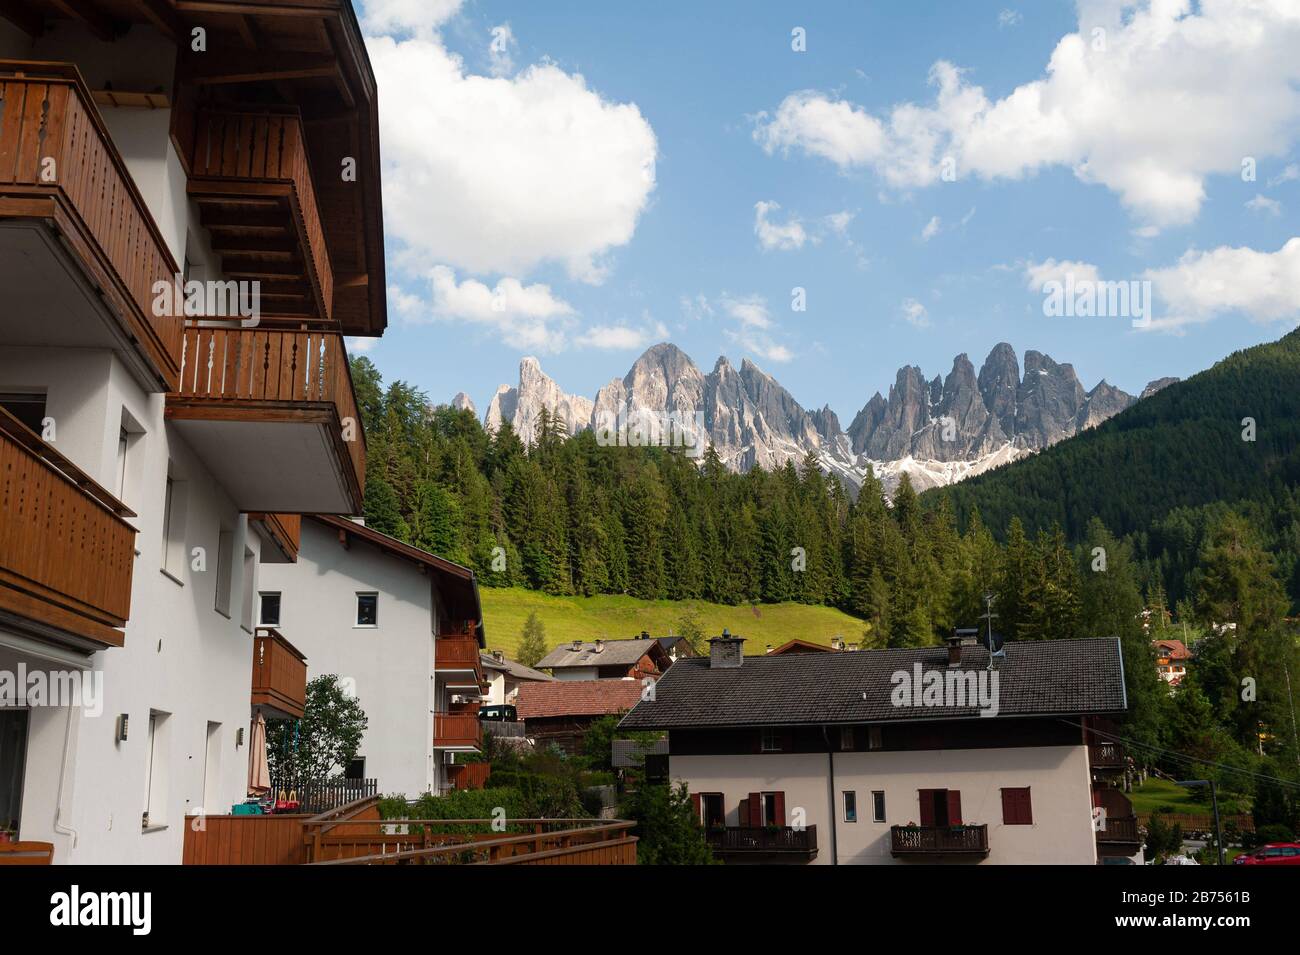 20.06.2019, St. Magdalena, Villnoess, Trentino, South Tyrol, Italy, Europe - holiday homes in the Villnoesstal valley with mountains of the Dolomites of the Puez Geisler group. [automated translation] Stock Photo